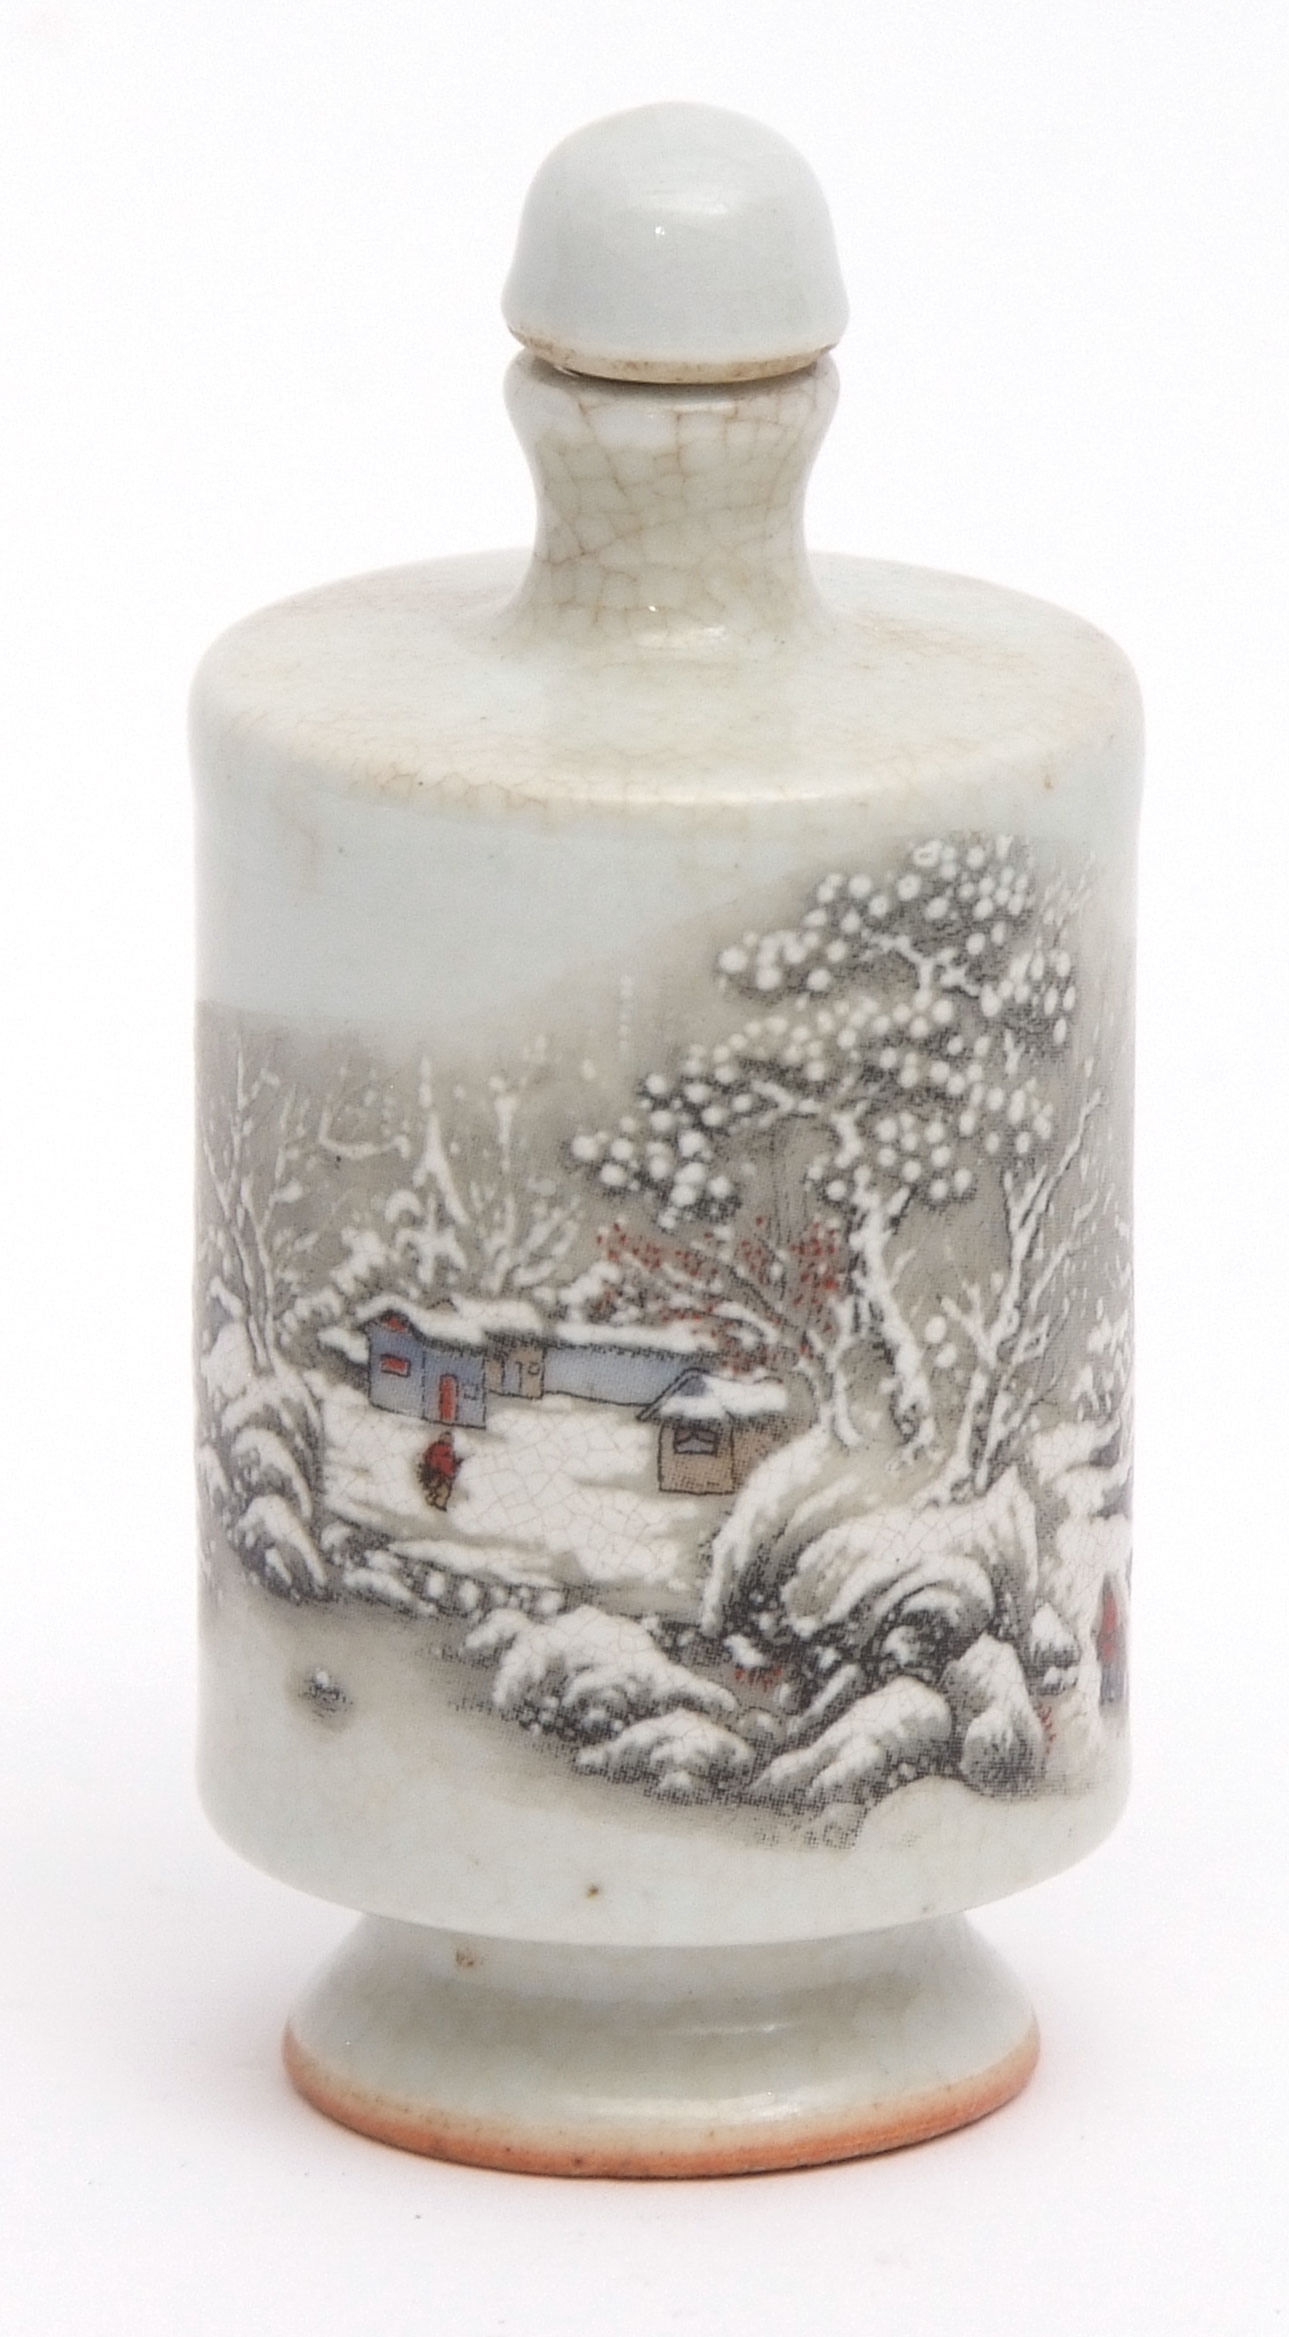 Chinese porcelain snuff bottle delicately painted with a lakeside snow scene depicting figures